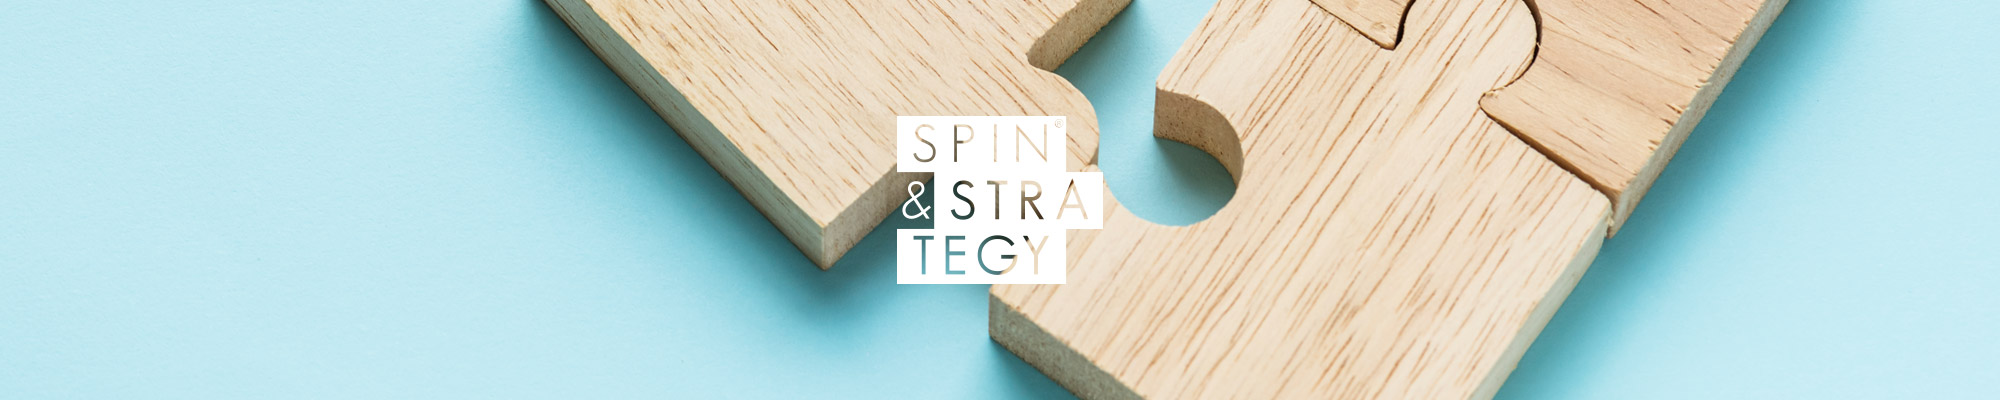 Spin & Strategy